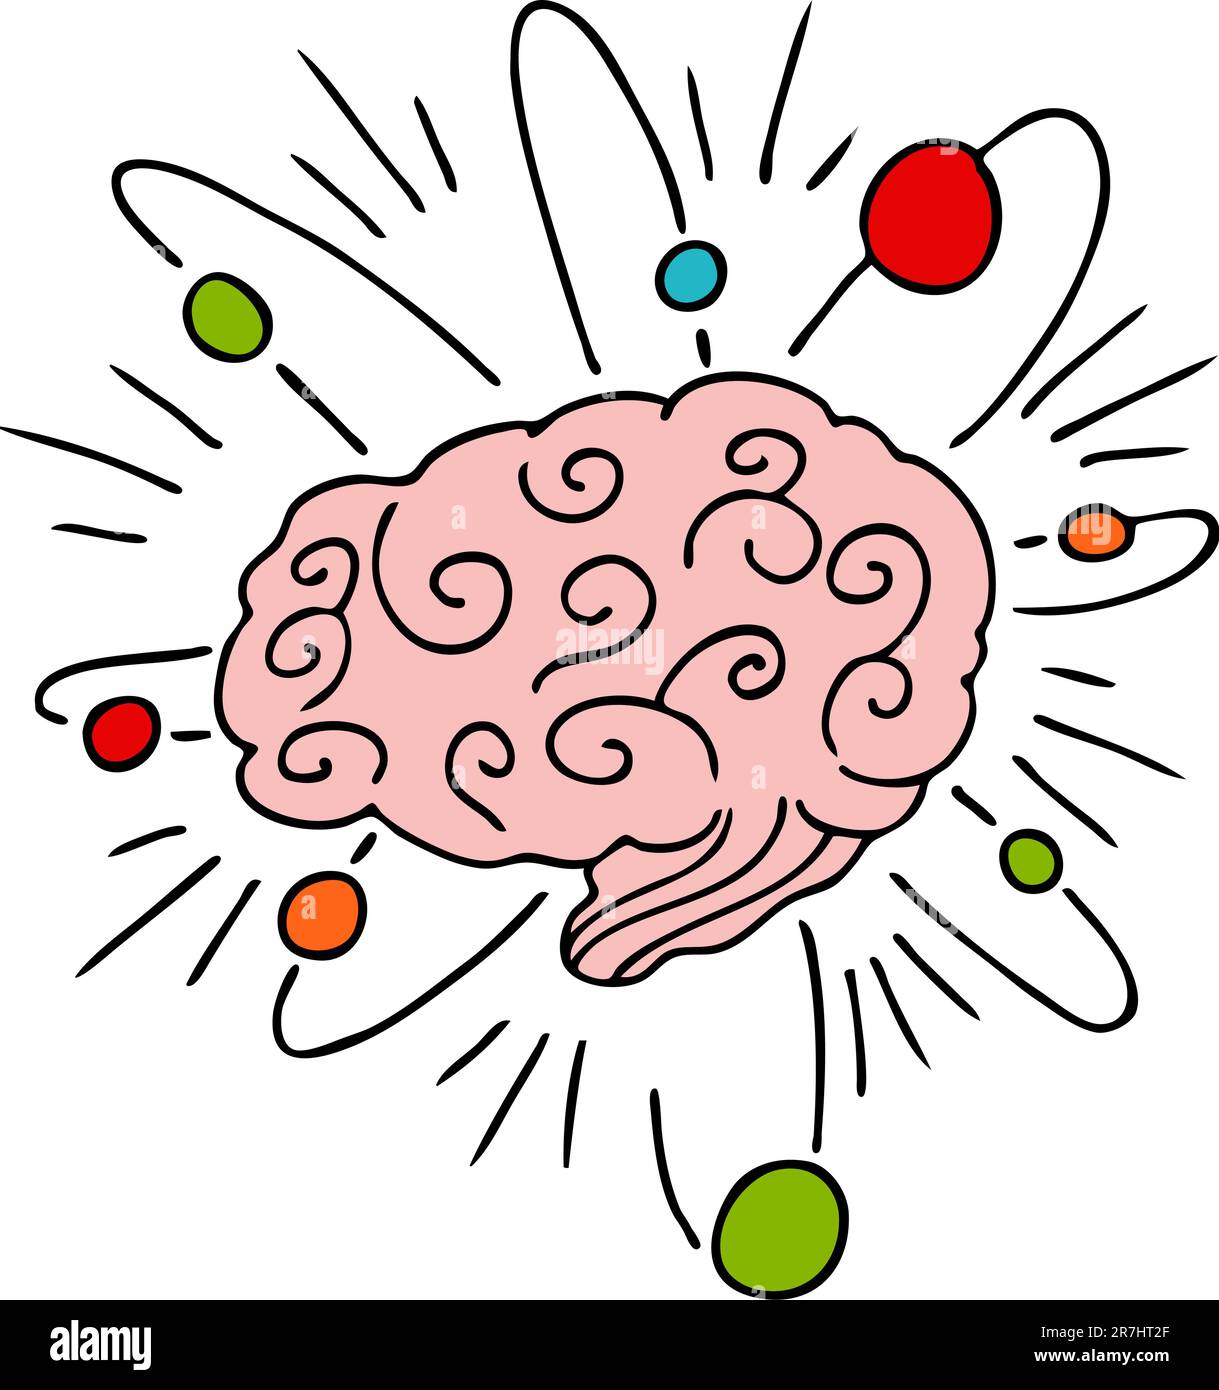 An image of a human brain with atomic powers. Stock Vector